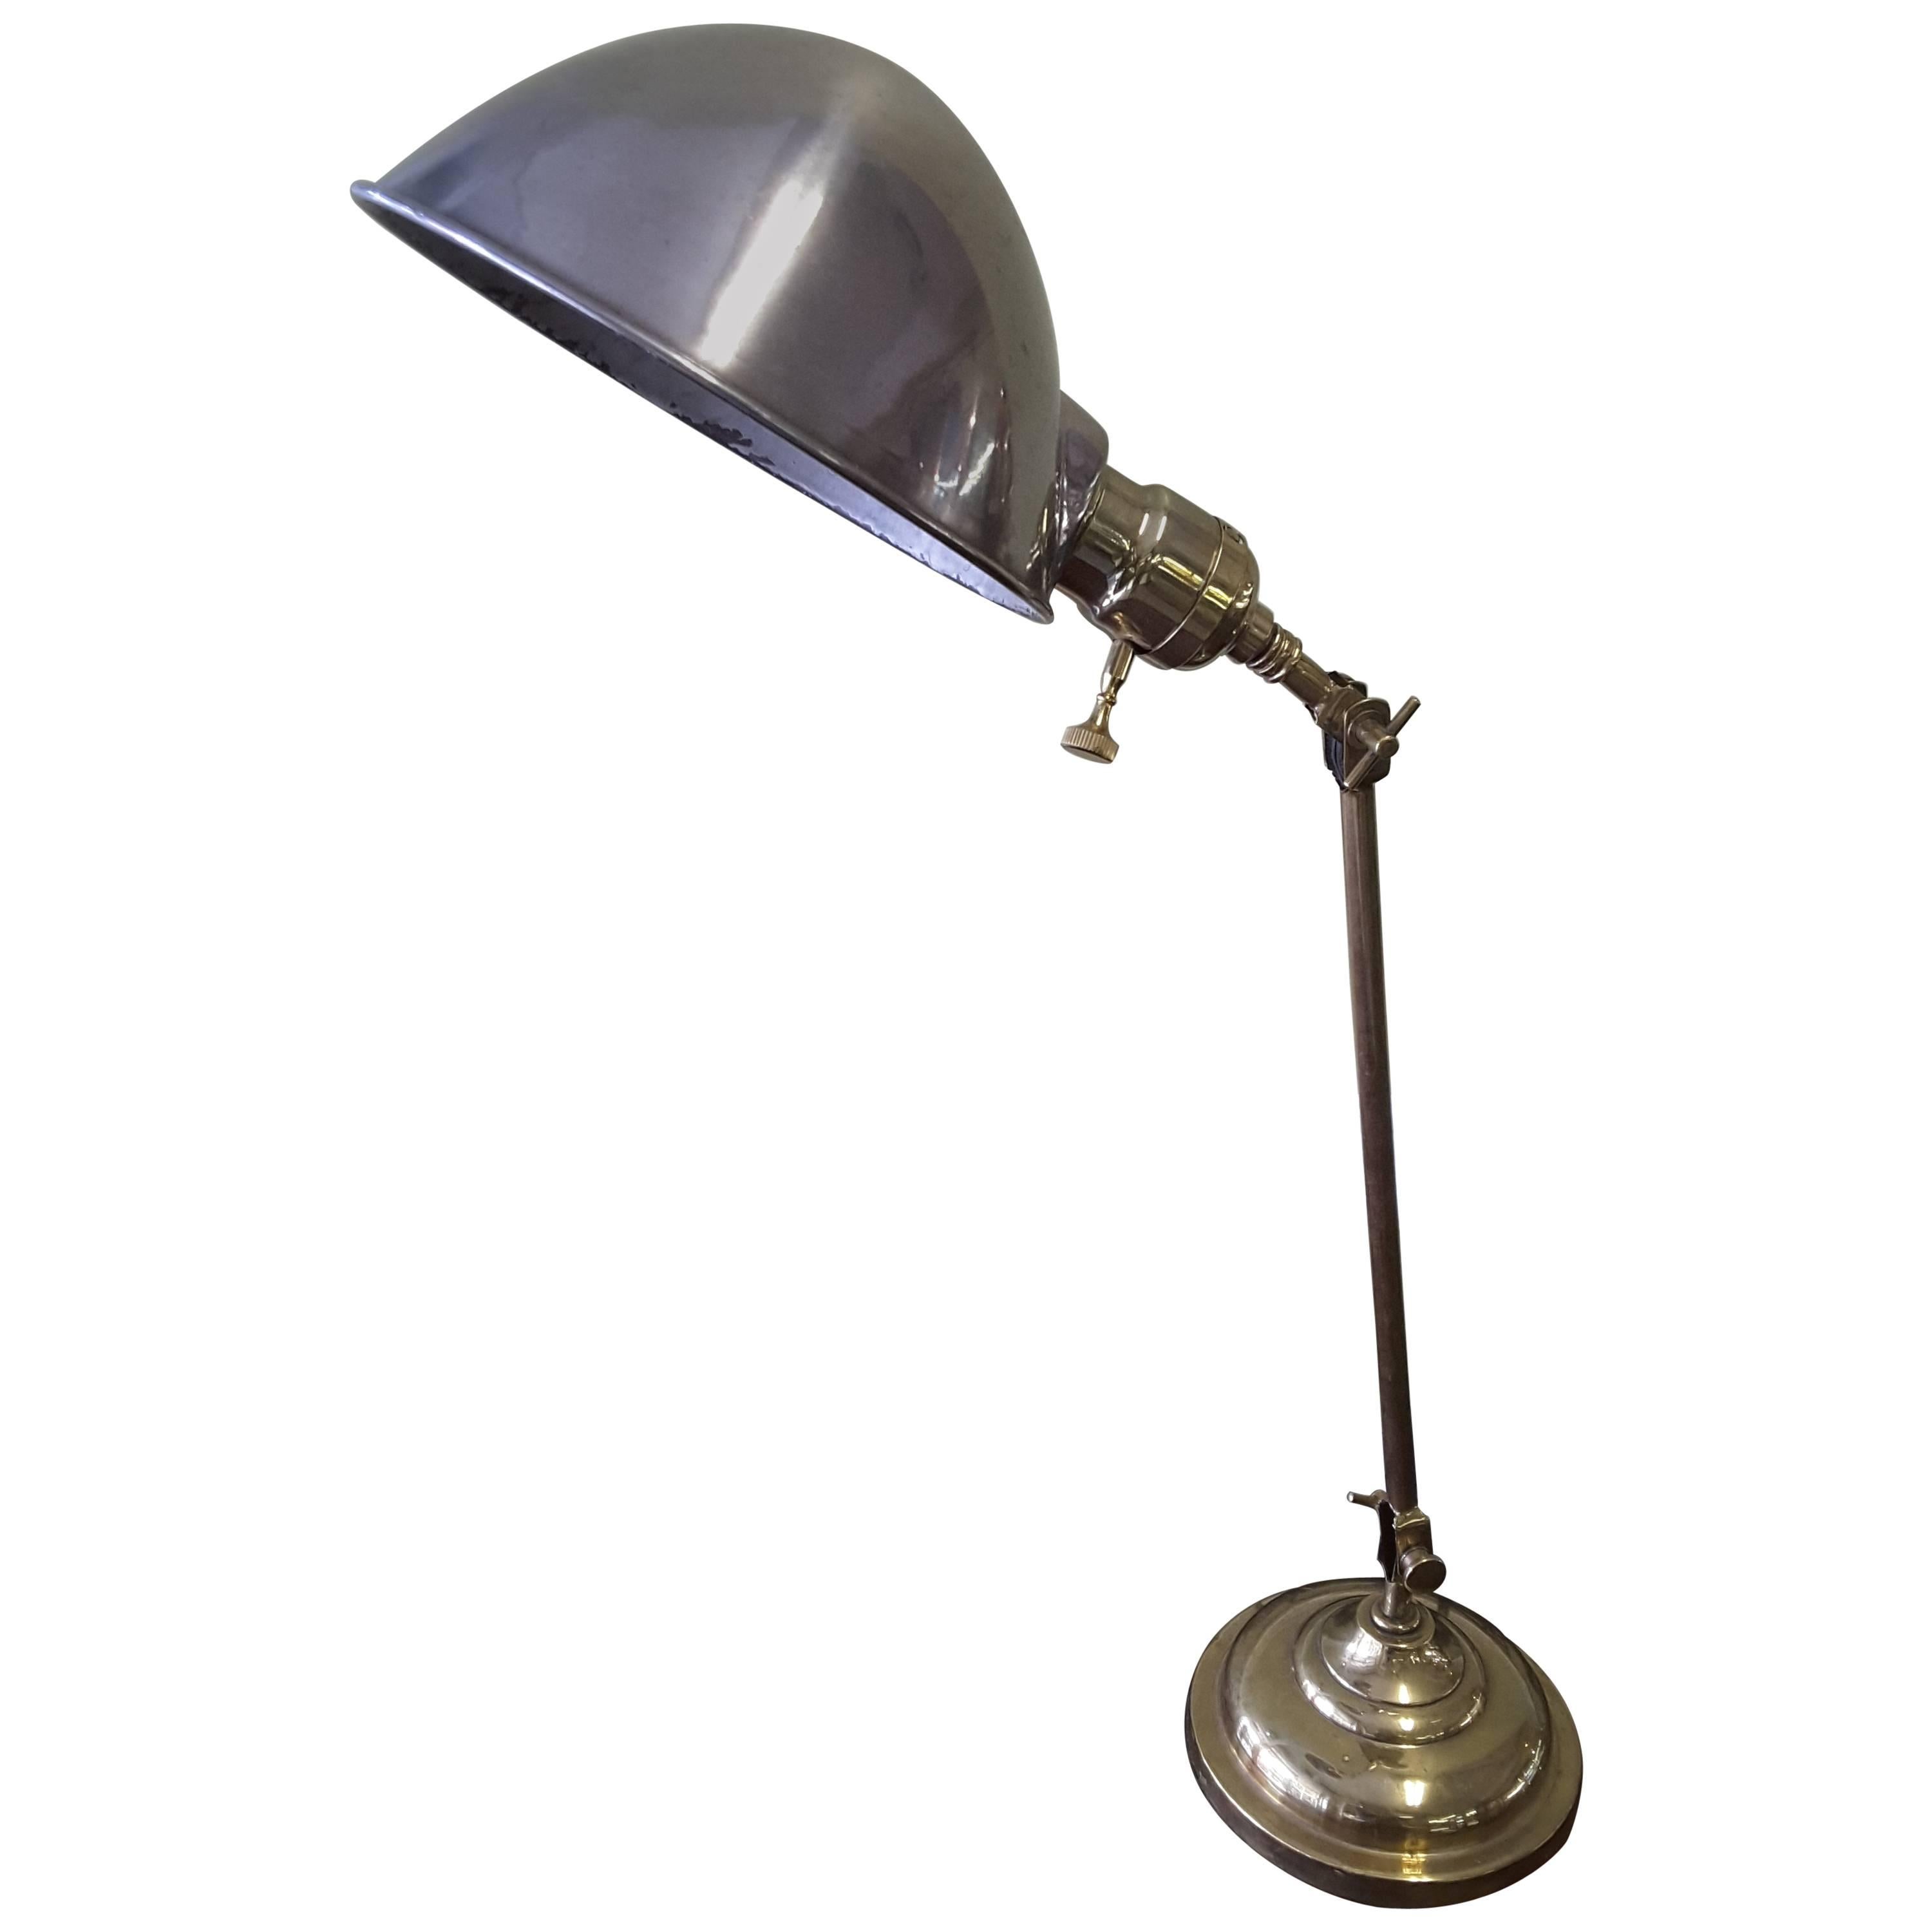 Faries Industrial Brass Adjustable Desk Lamp with Steel Shade, circa 1920